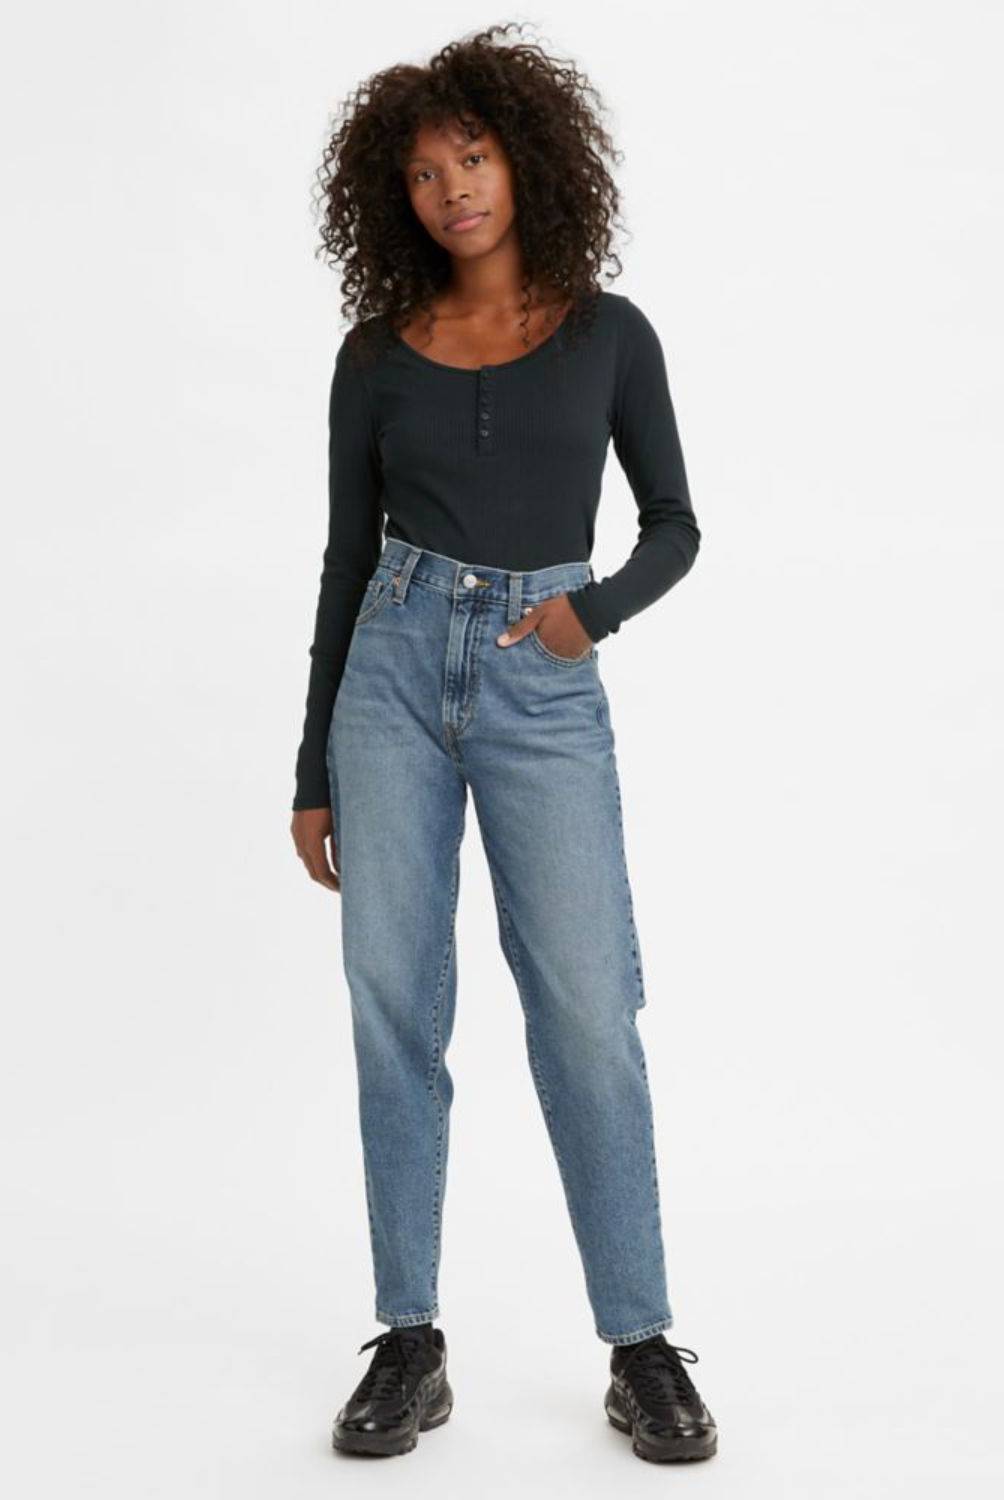 LEVIS - Jean High Waisted Taper Mujer Levis